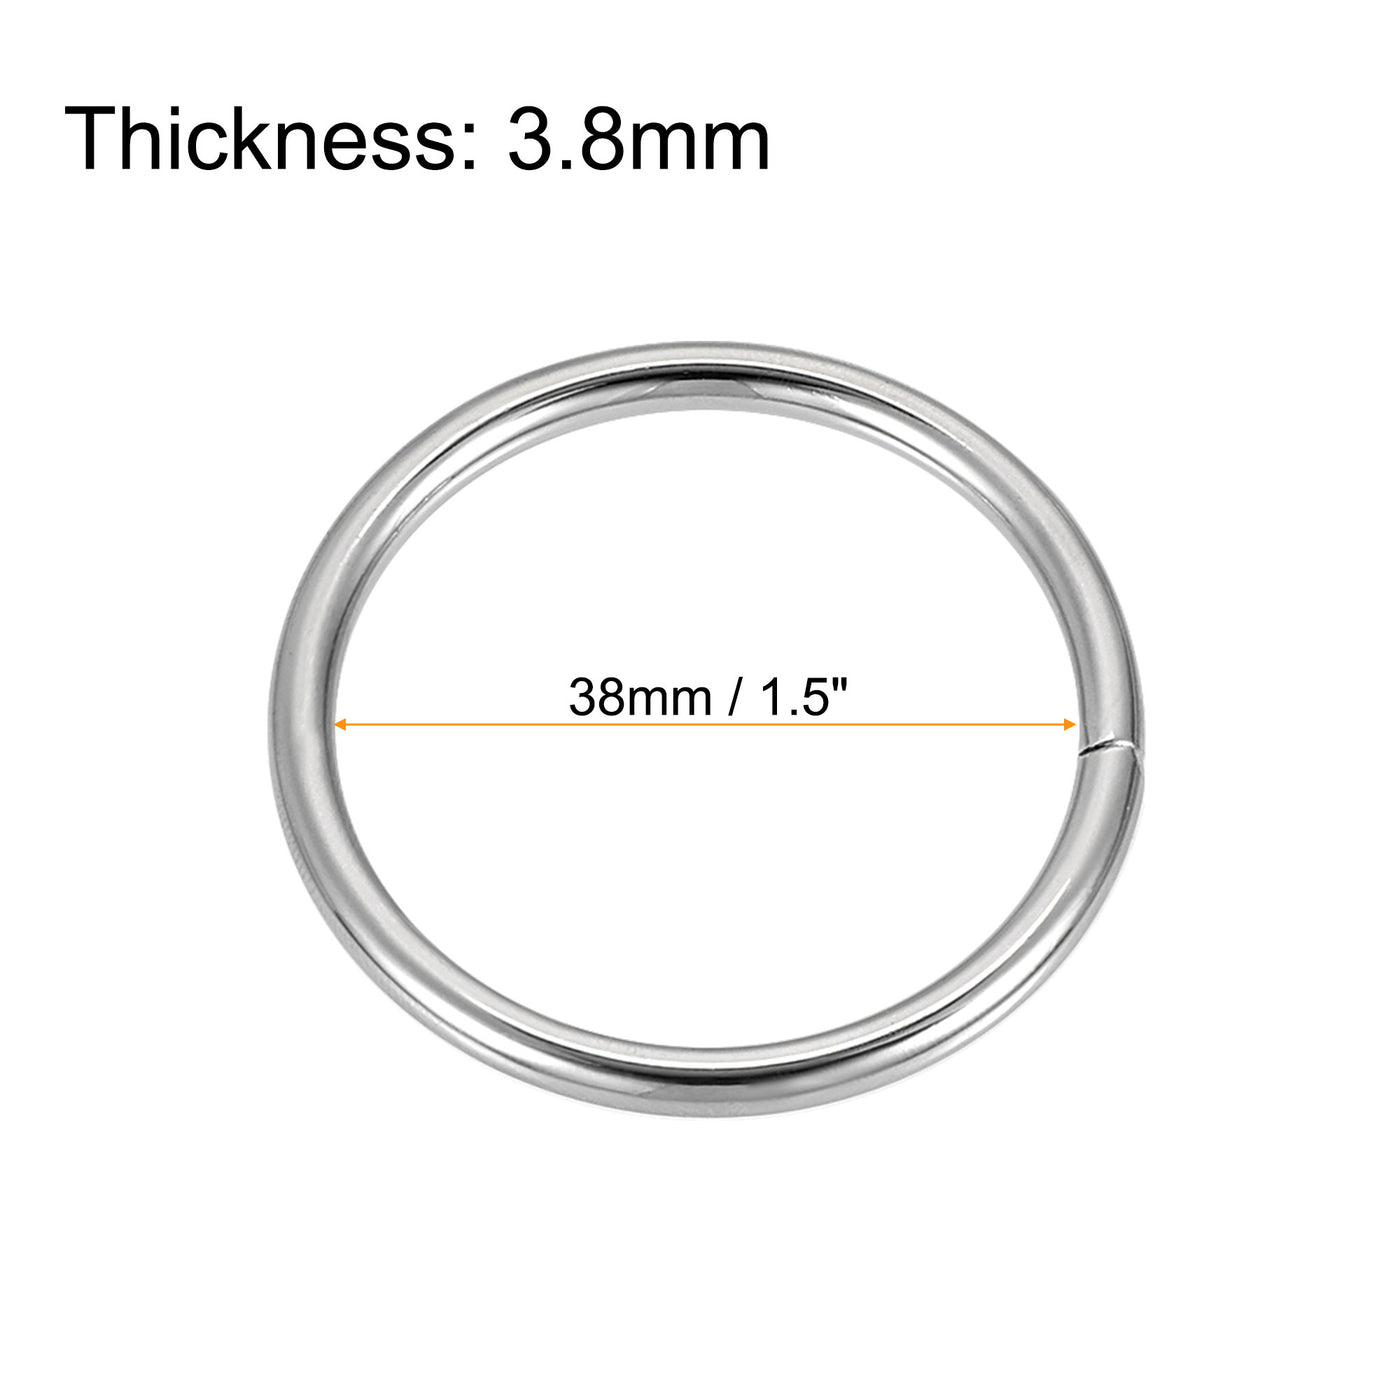 uxcell Uxcell Metal O Ring 38mm(1.5") ID 3.8mm Thickness Non-Welded Rings Silver Tone 10pcs